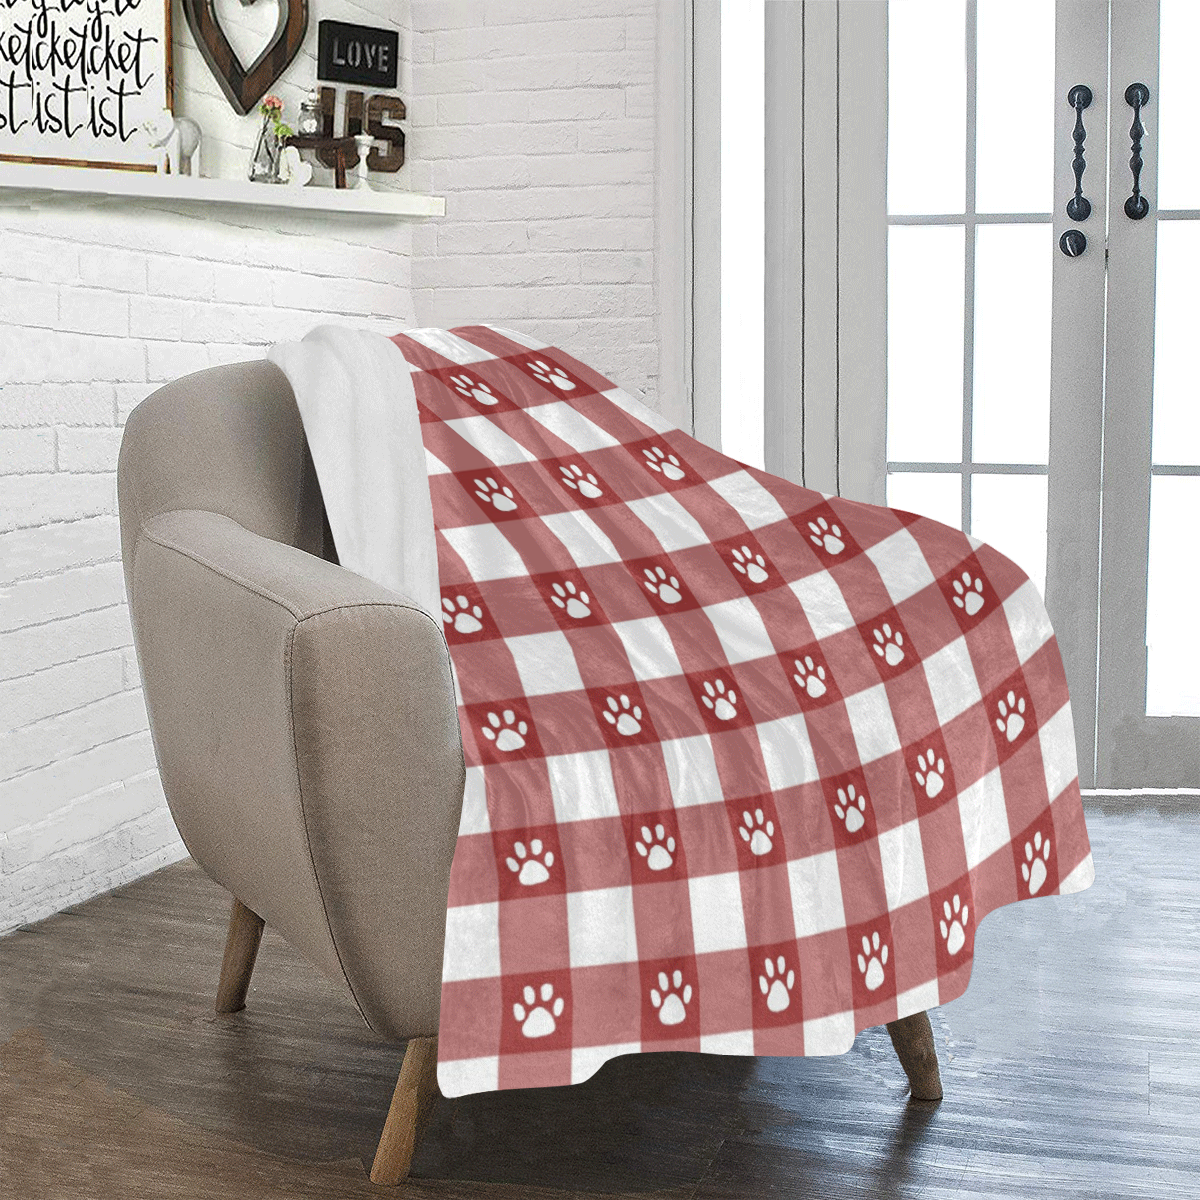 Plaid and paws Ultra-Soft Micro Fleece Blanket 40"x50"